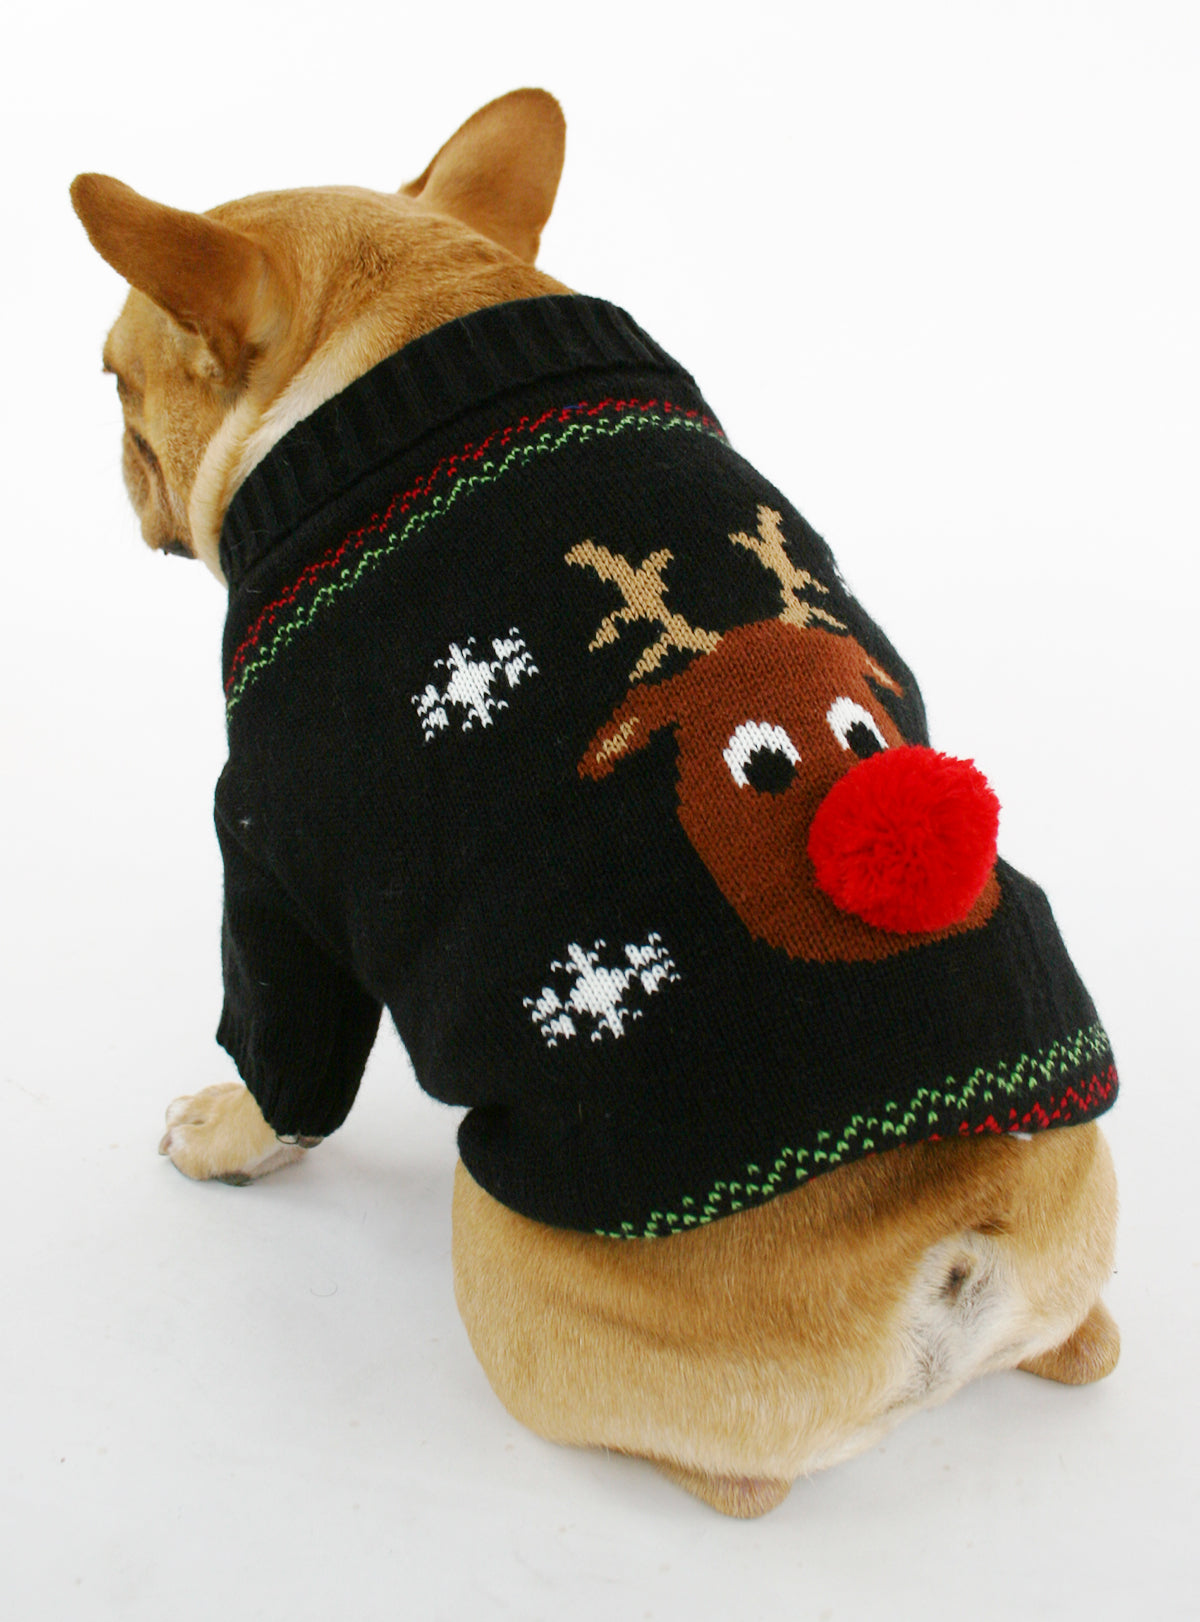 The Rudolph Dog Sweater